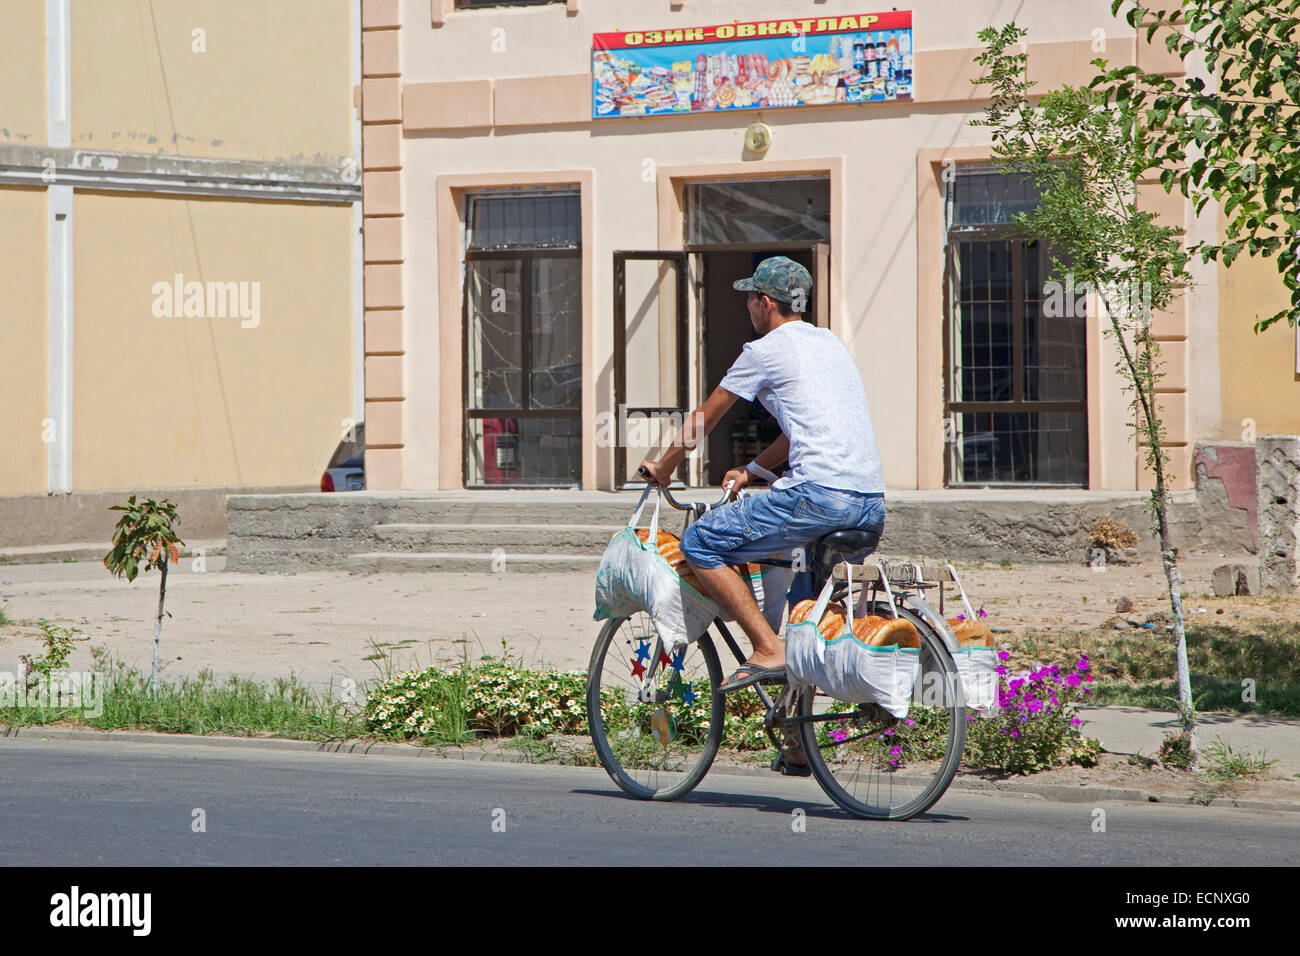 Uzbek man riding bicycle delivers traditional tandoor bread from bakery to houses in small town near Samarkand, Uzbekistan Stock Photo